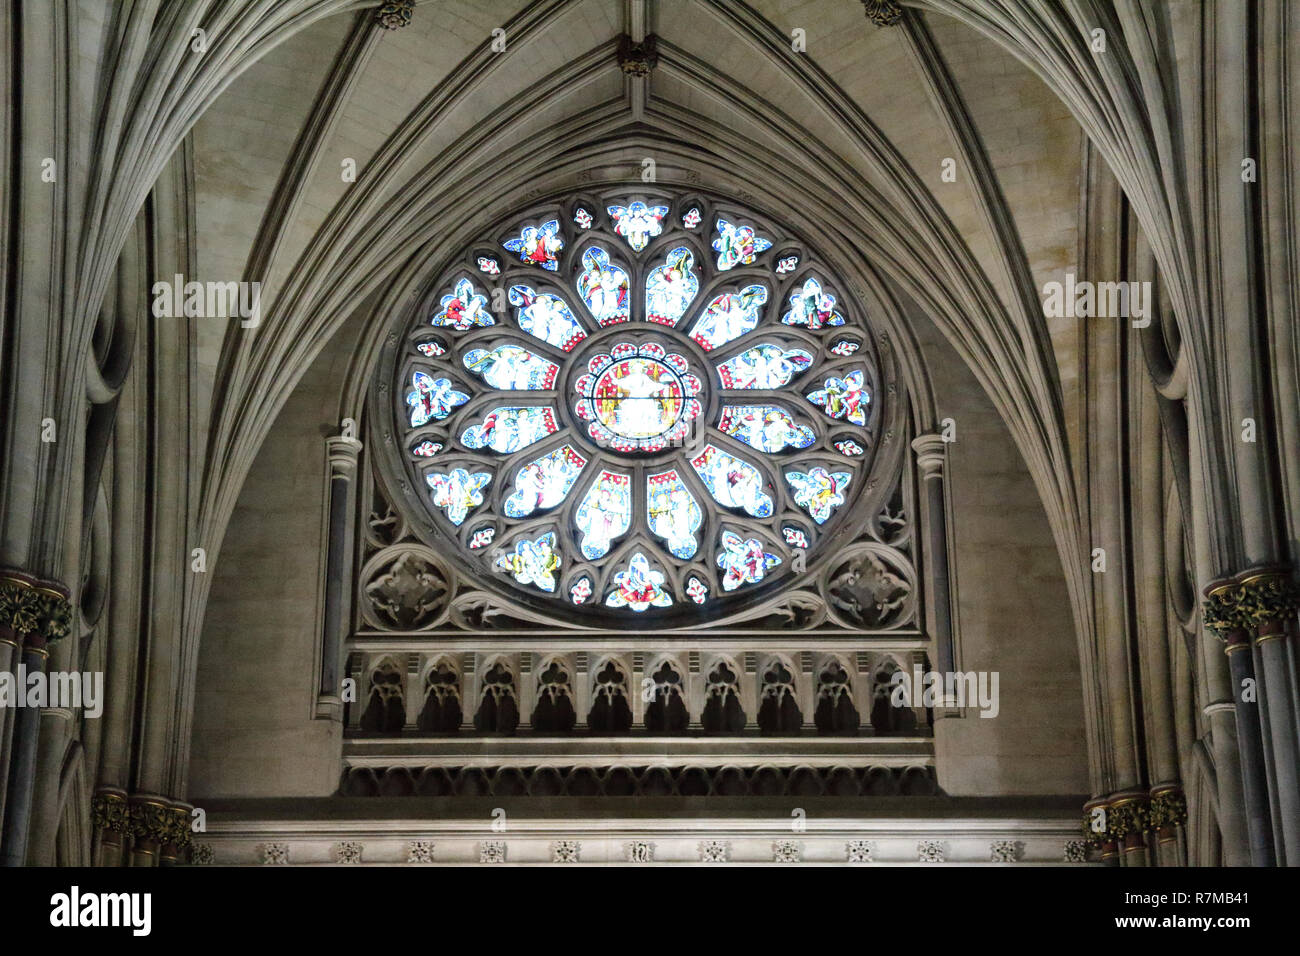 The main rose window under the pointed arch vault with colored stained glasses and Gothic decorations in the Bristol Cathedral, United Kingdom Stock Photo